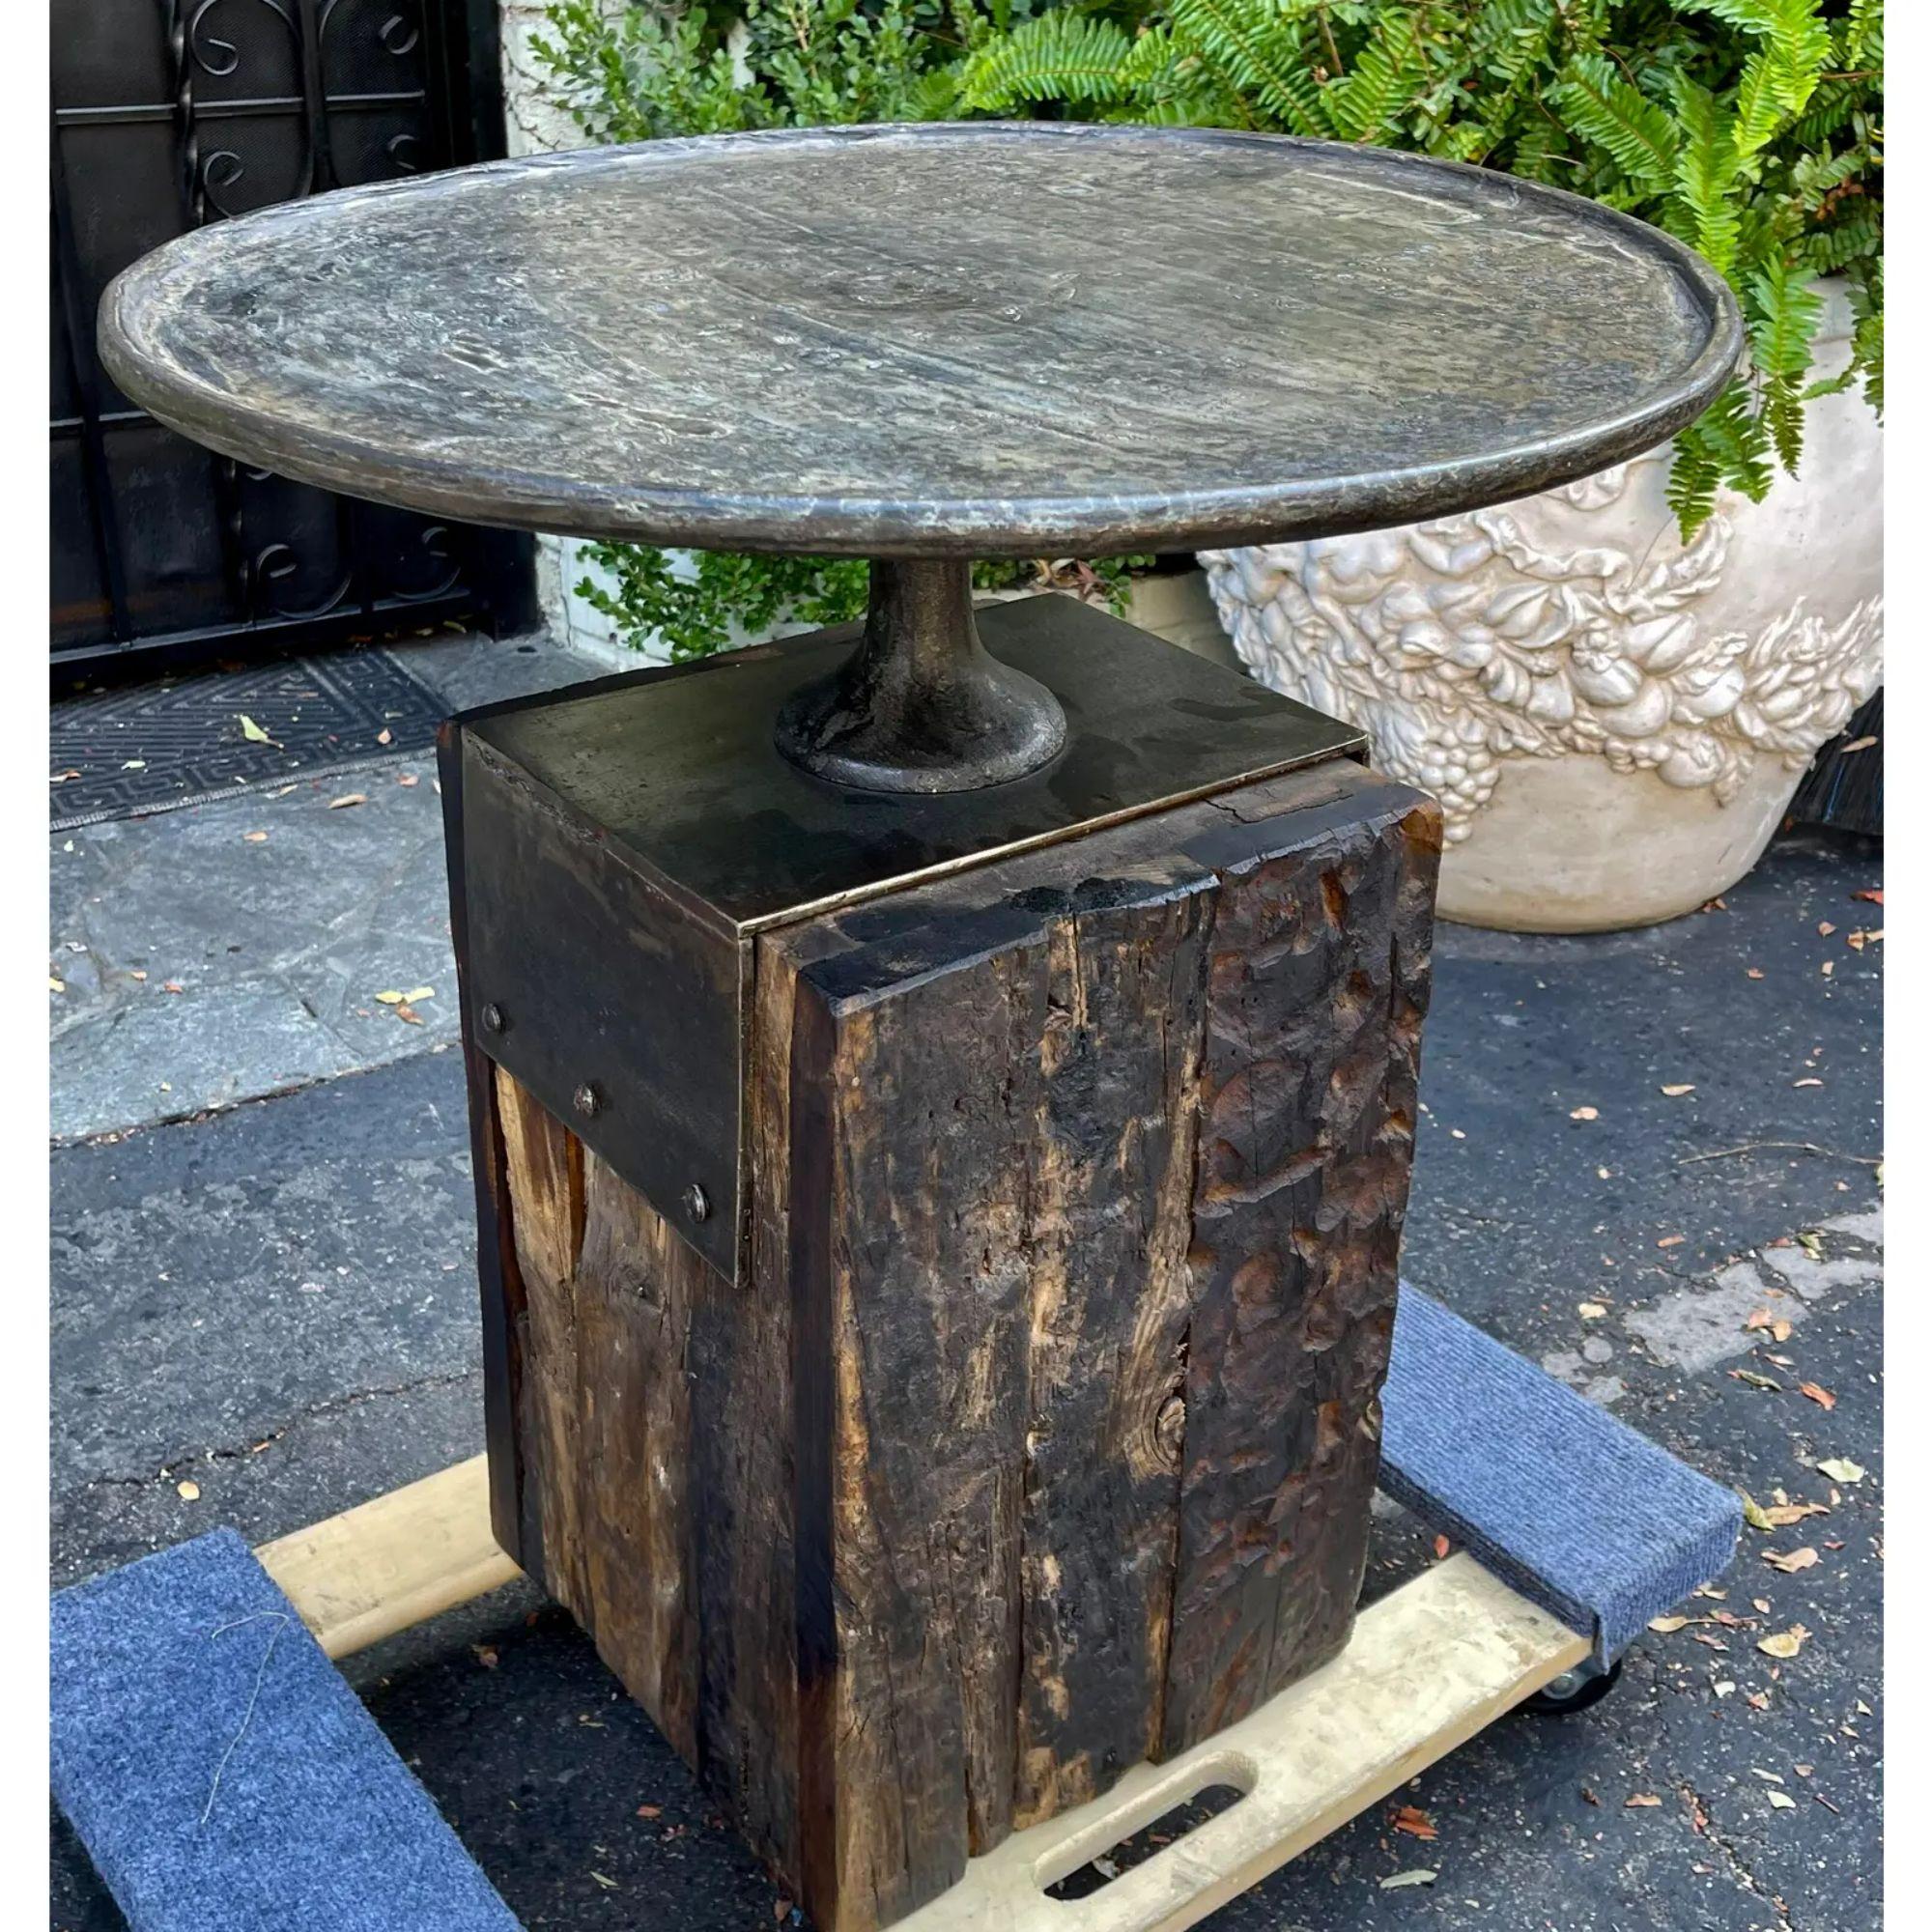 Modern arteriors industrial chic pounded iron & railroad tie table

Additional information:
Materials: iron, wood
Color: gray
Brand: Arteriors Home
Period: 2000 - 2009
Styles: Industrial, Modern
Table Shape: Round
Item Type: Vintage,